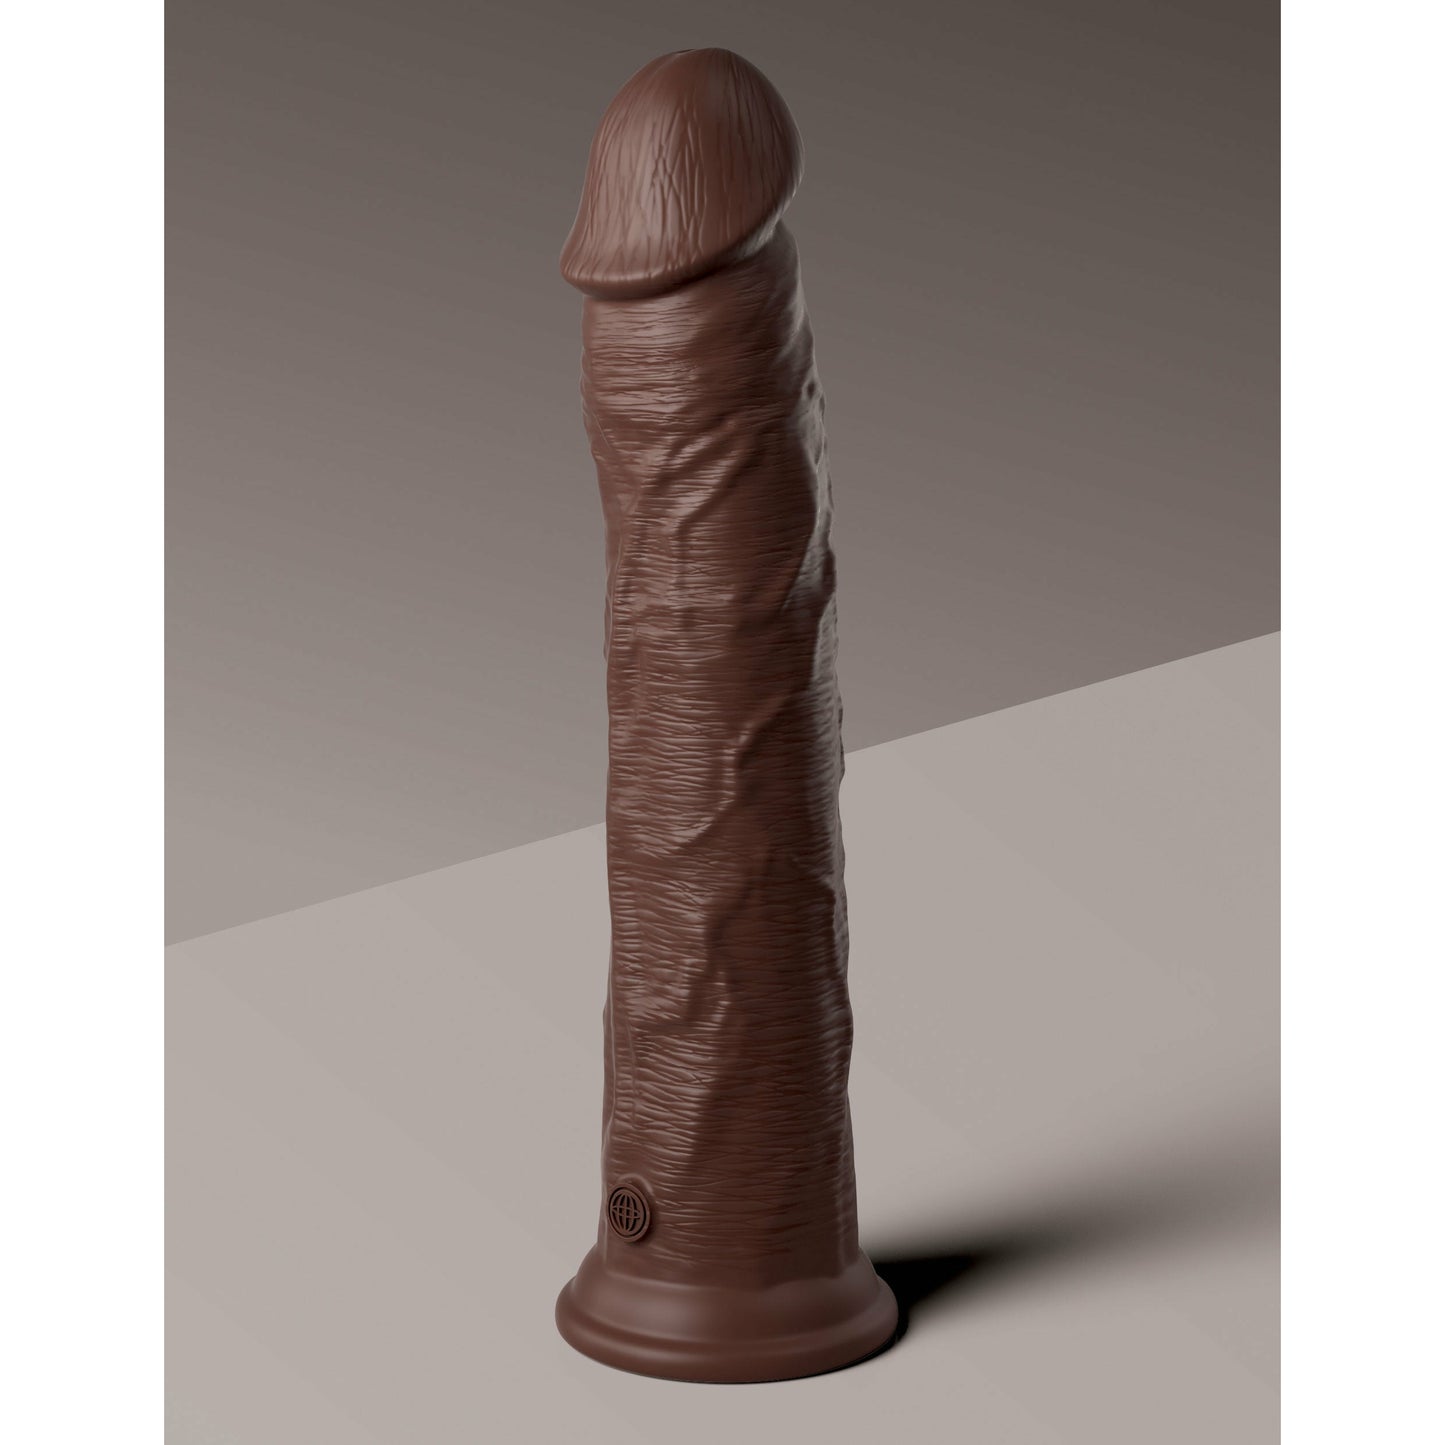 King Cock Elite 11 Inch Silicone Dual Density Cock - Brown